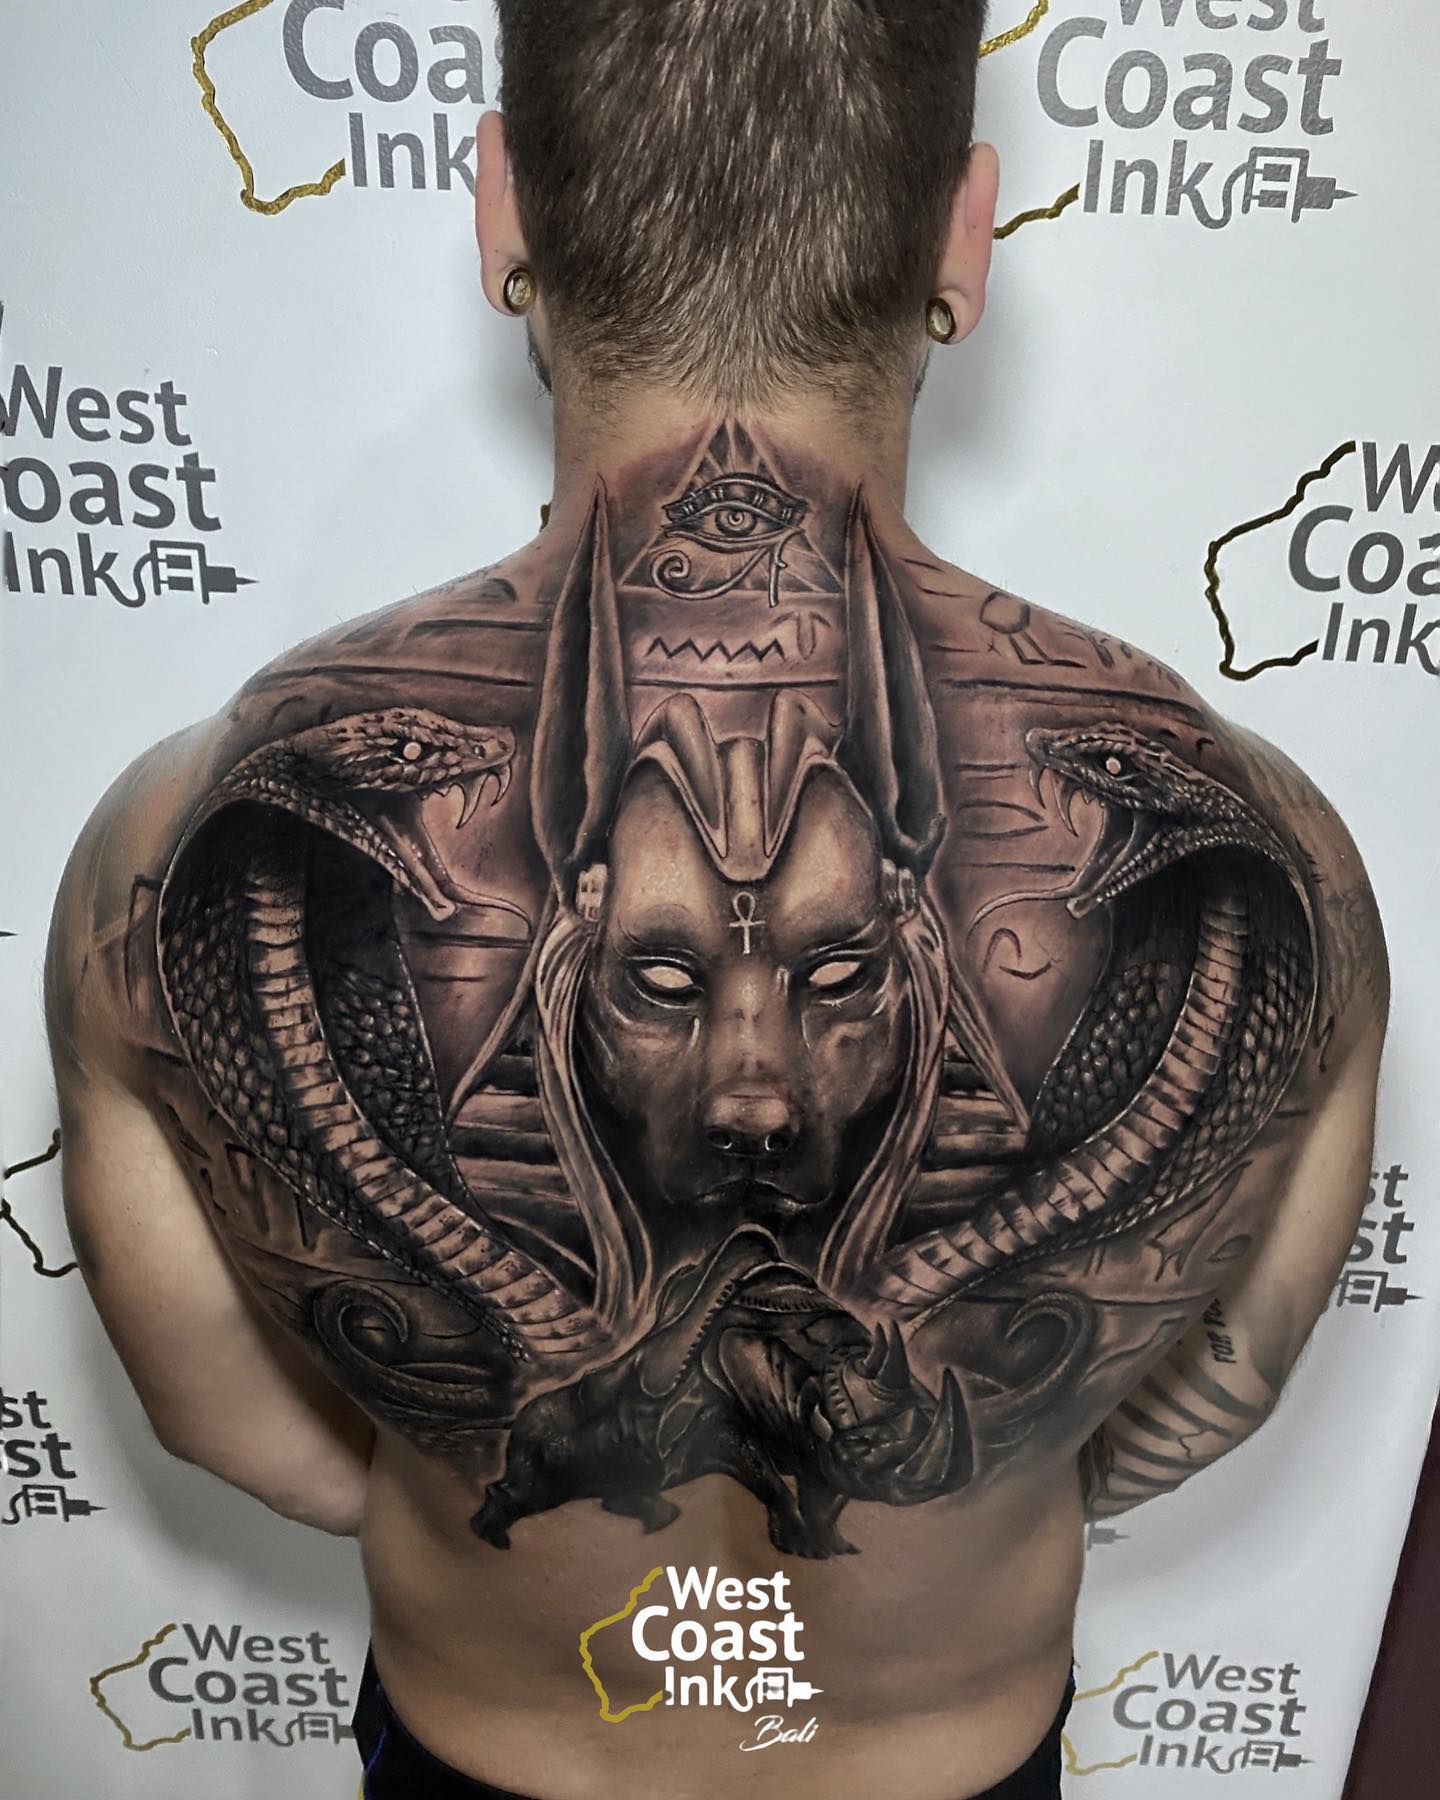 Along with other details, this tattoo will turn your back into an art piece.